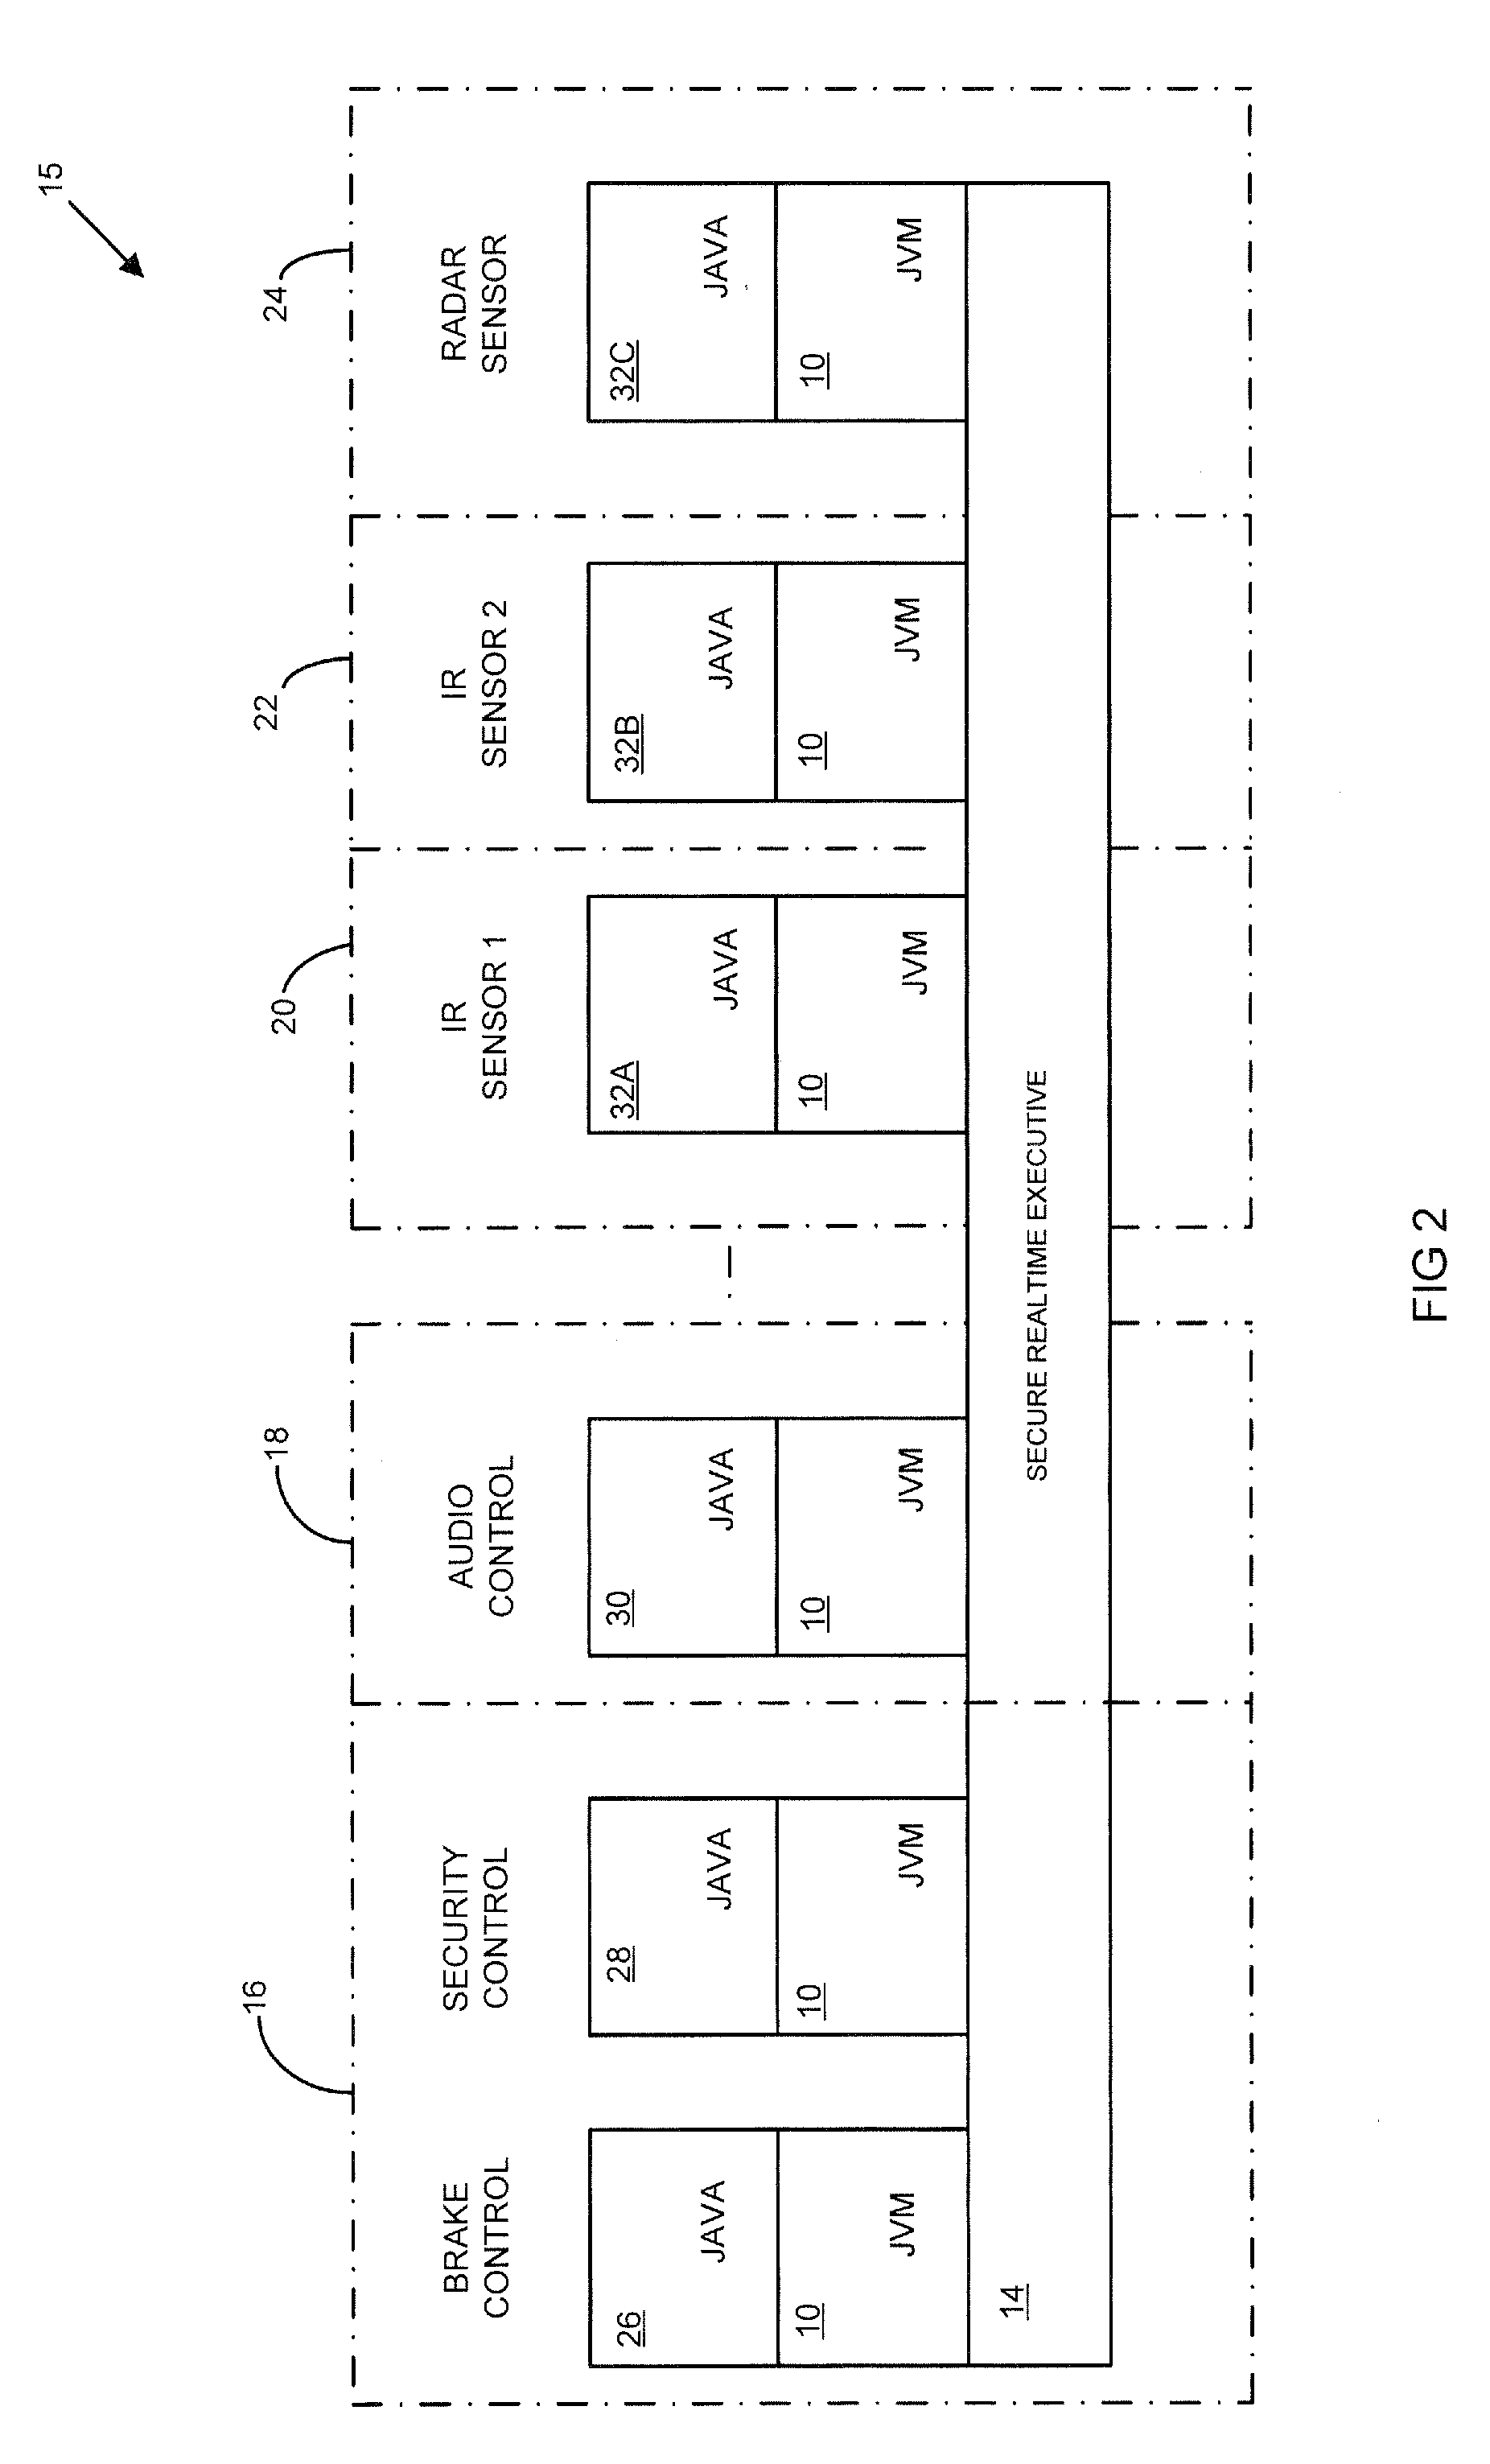 Method for multi-tasking multiple Java virtual machines in a secure environment